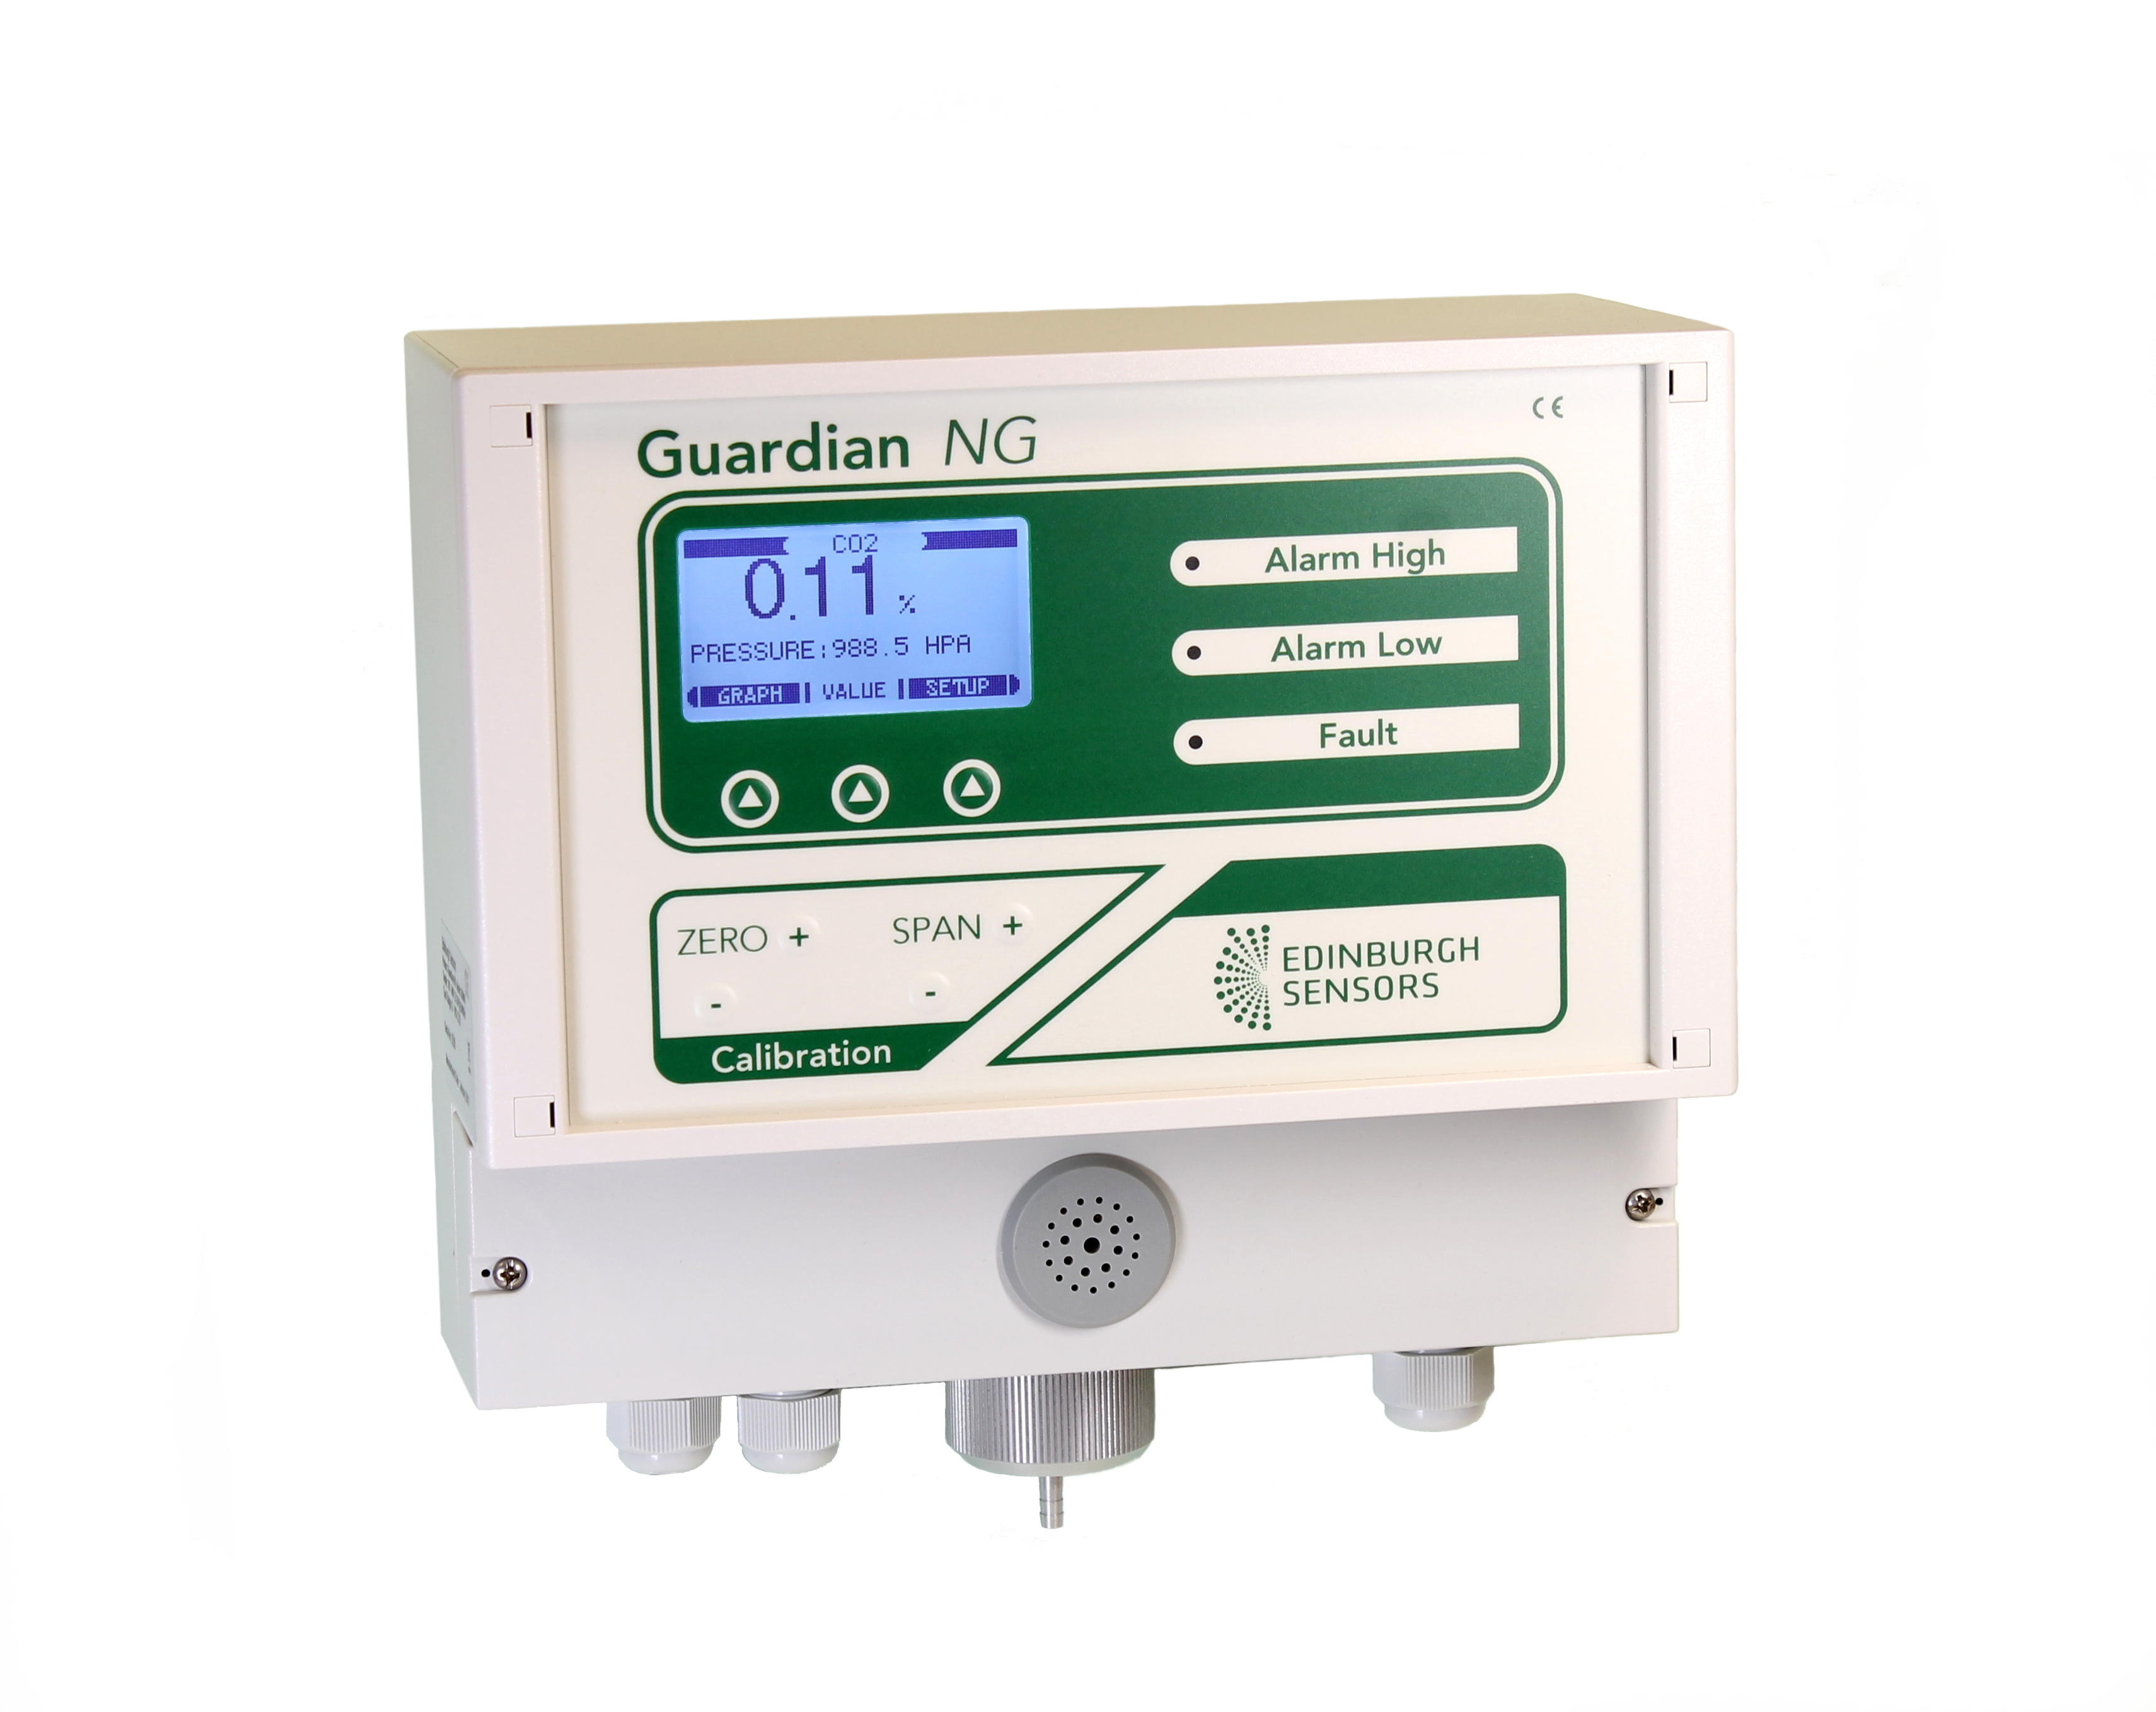 Carbon dioxide monitor the Guardian NG for CO2 monitoring